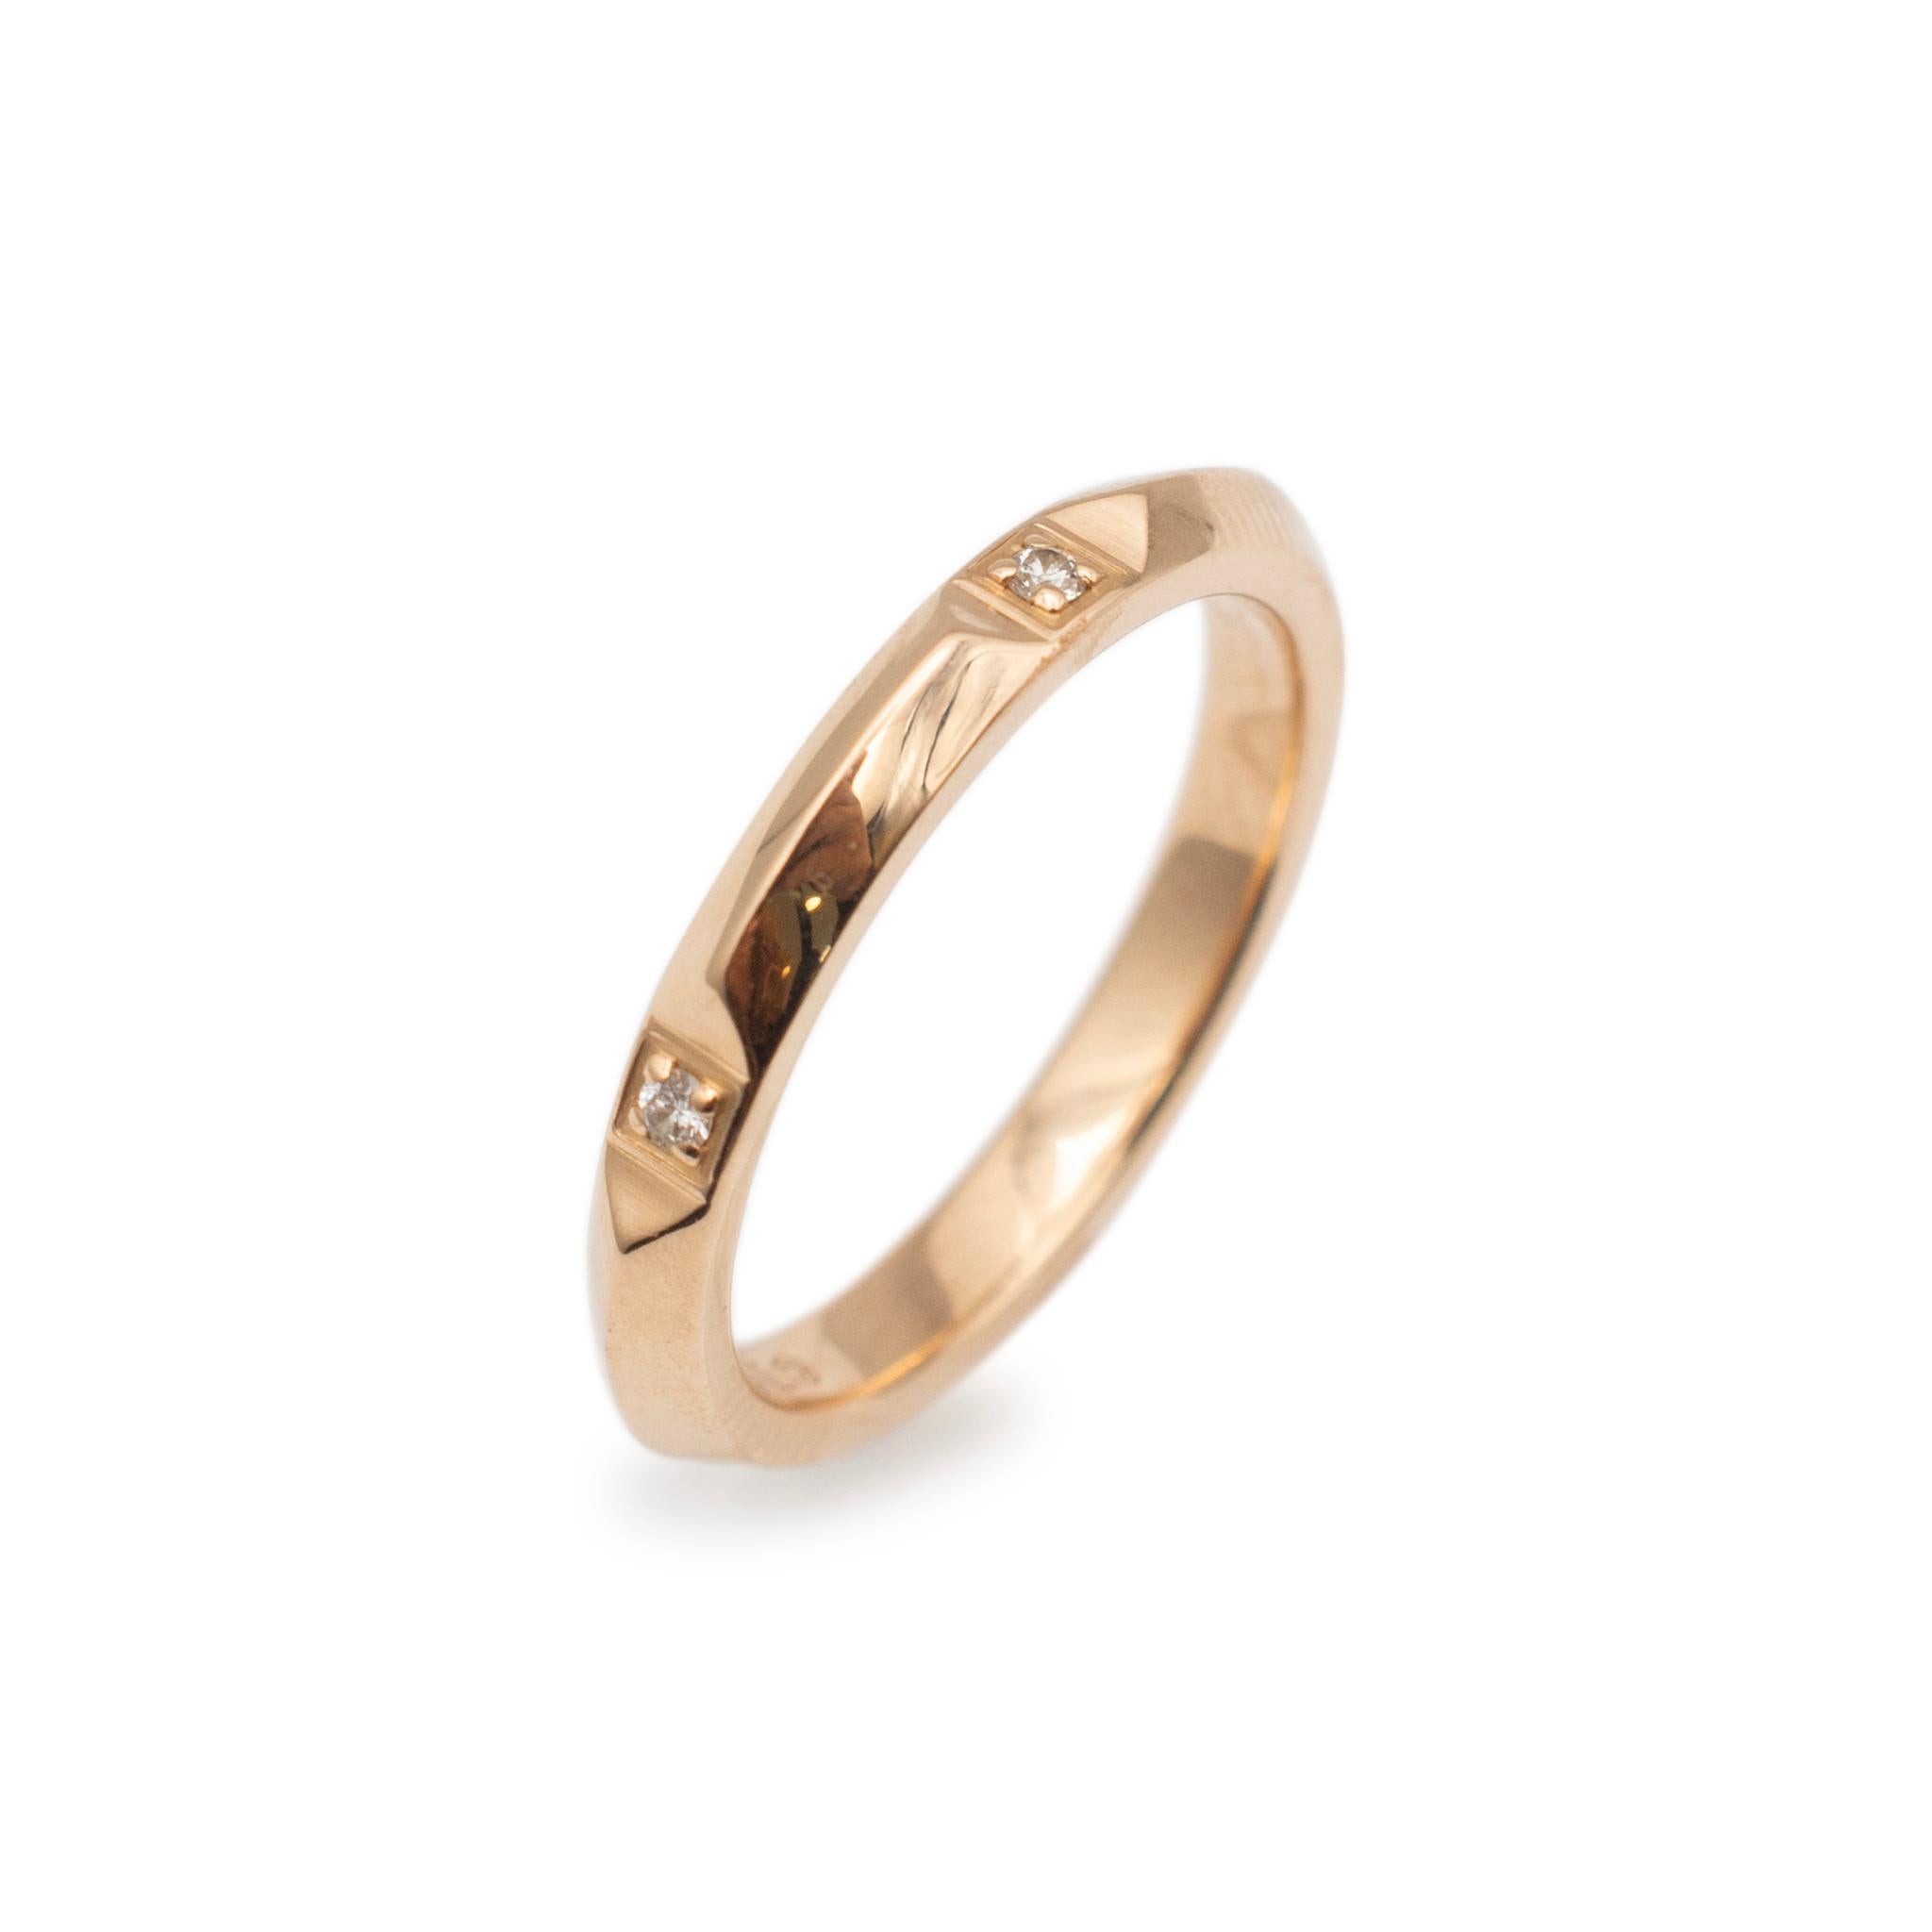 Brand: Tiffany & Co.

Metal Type: 18K Rose Gold

Size: 6

Width: 2.50 mm

Weight: 3.50 grams

Lady's TIFFANY & CO. 18K rose gold five-across, diamond modern-style (1950 to present) wedding band with a half-round shank.  Engraved with 